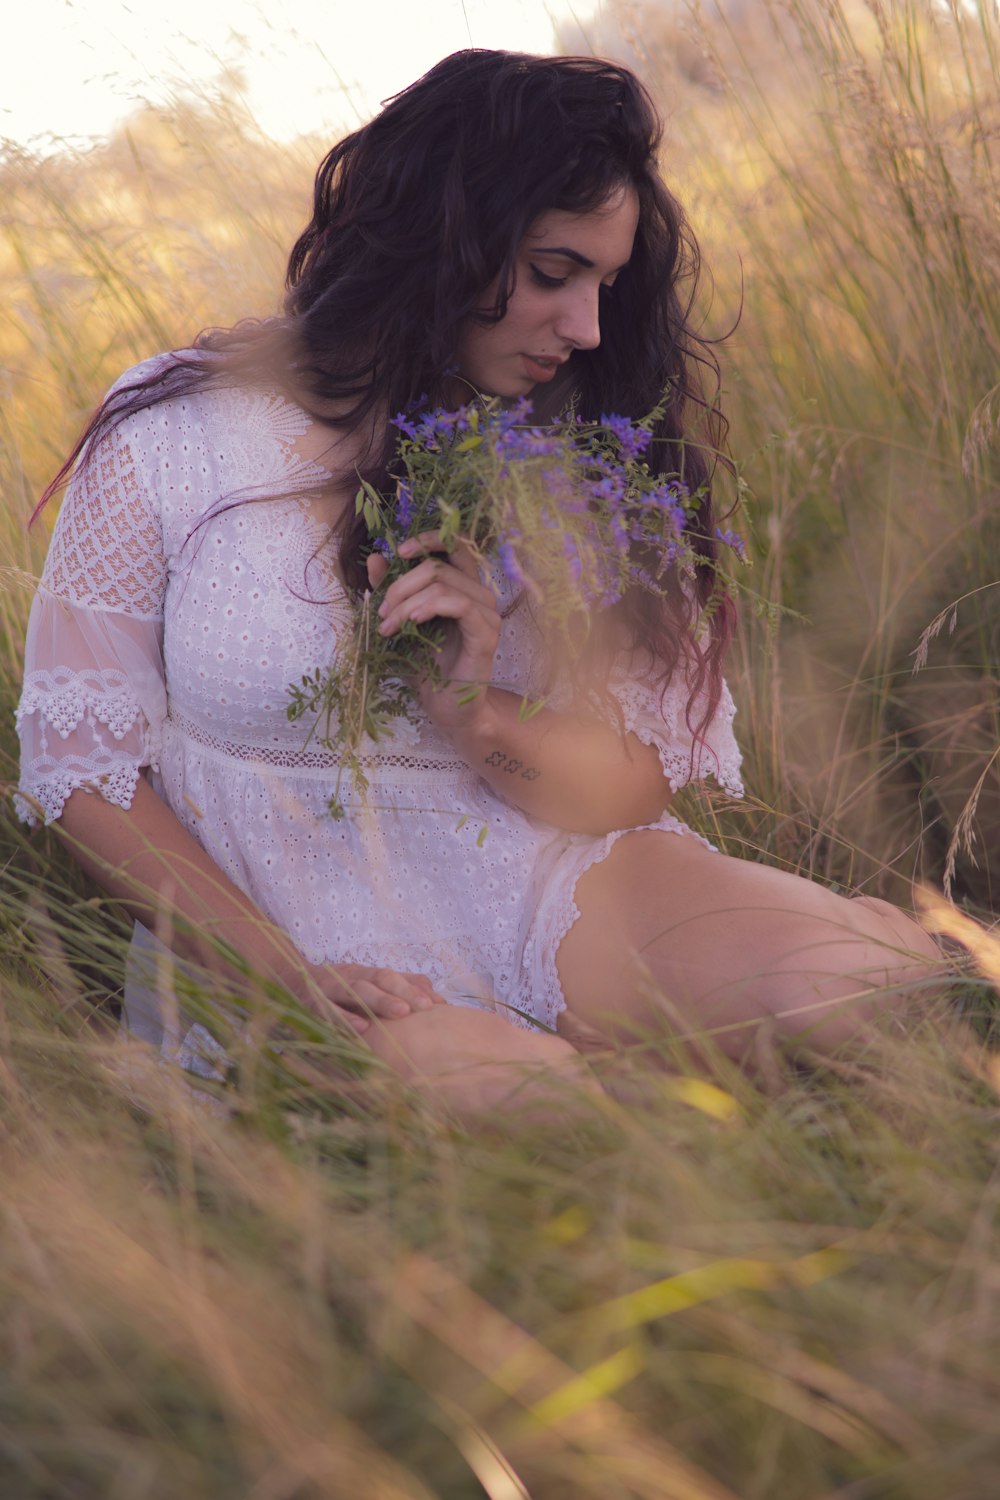 woman in white lace dress sitting on grass field